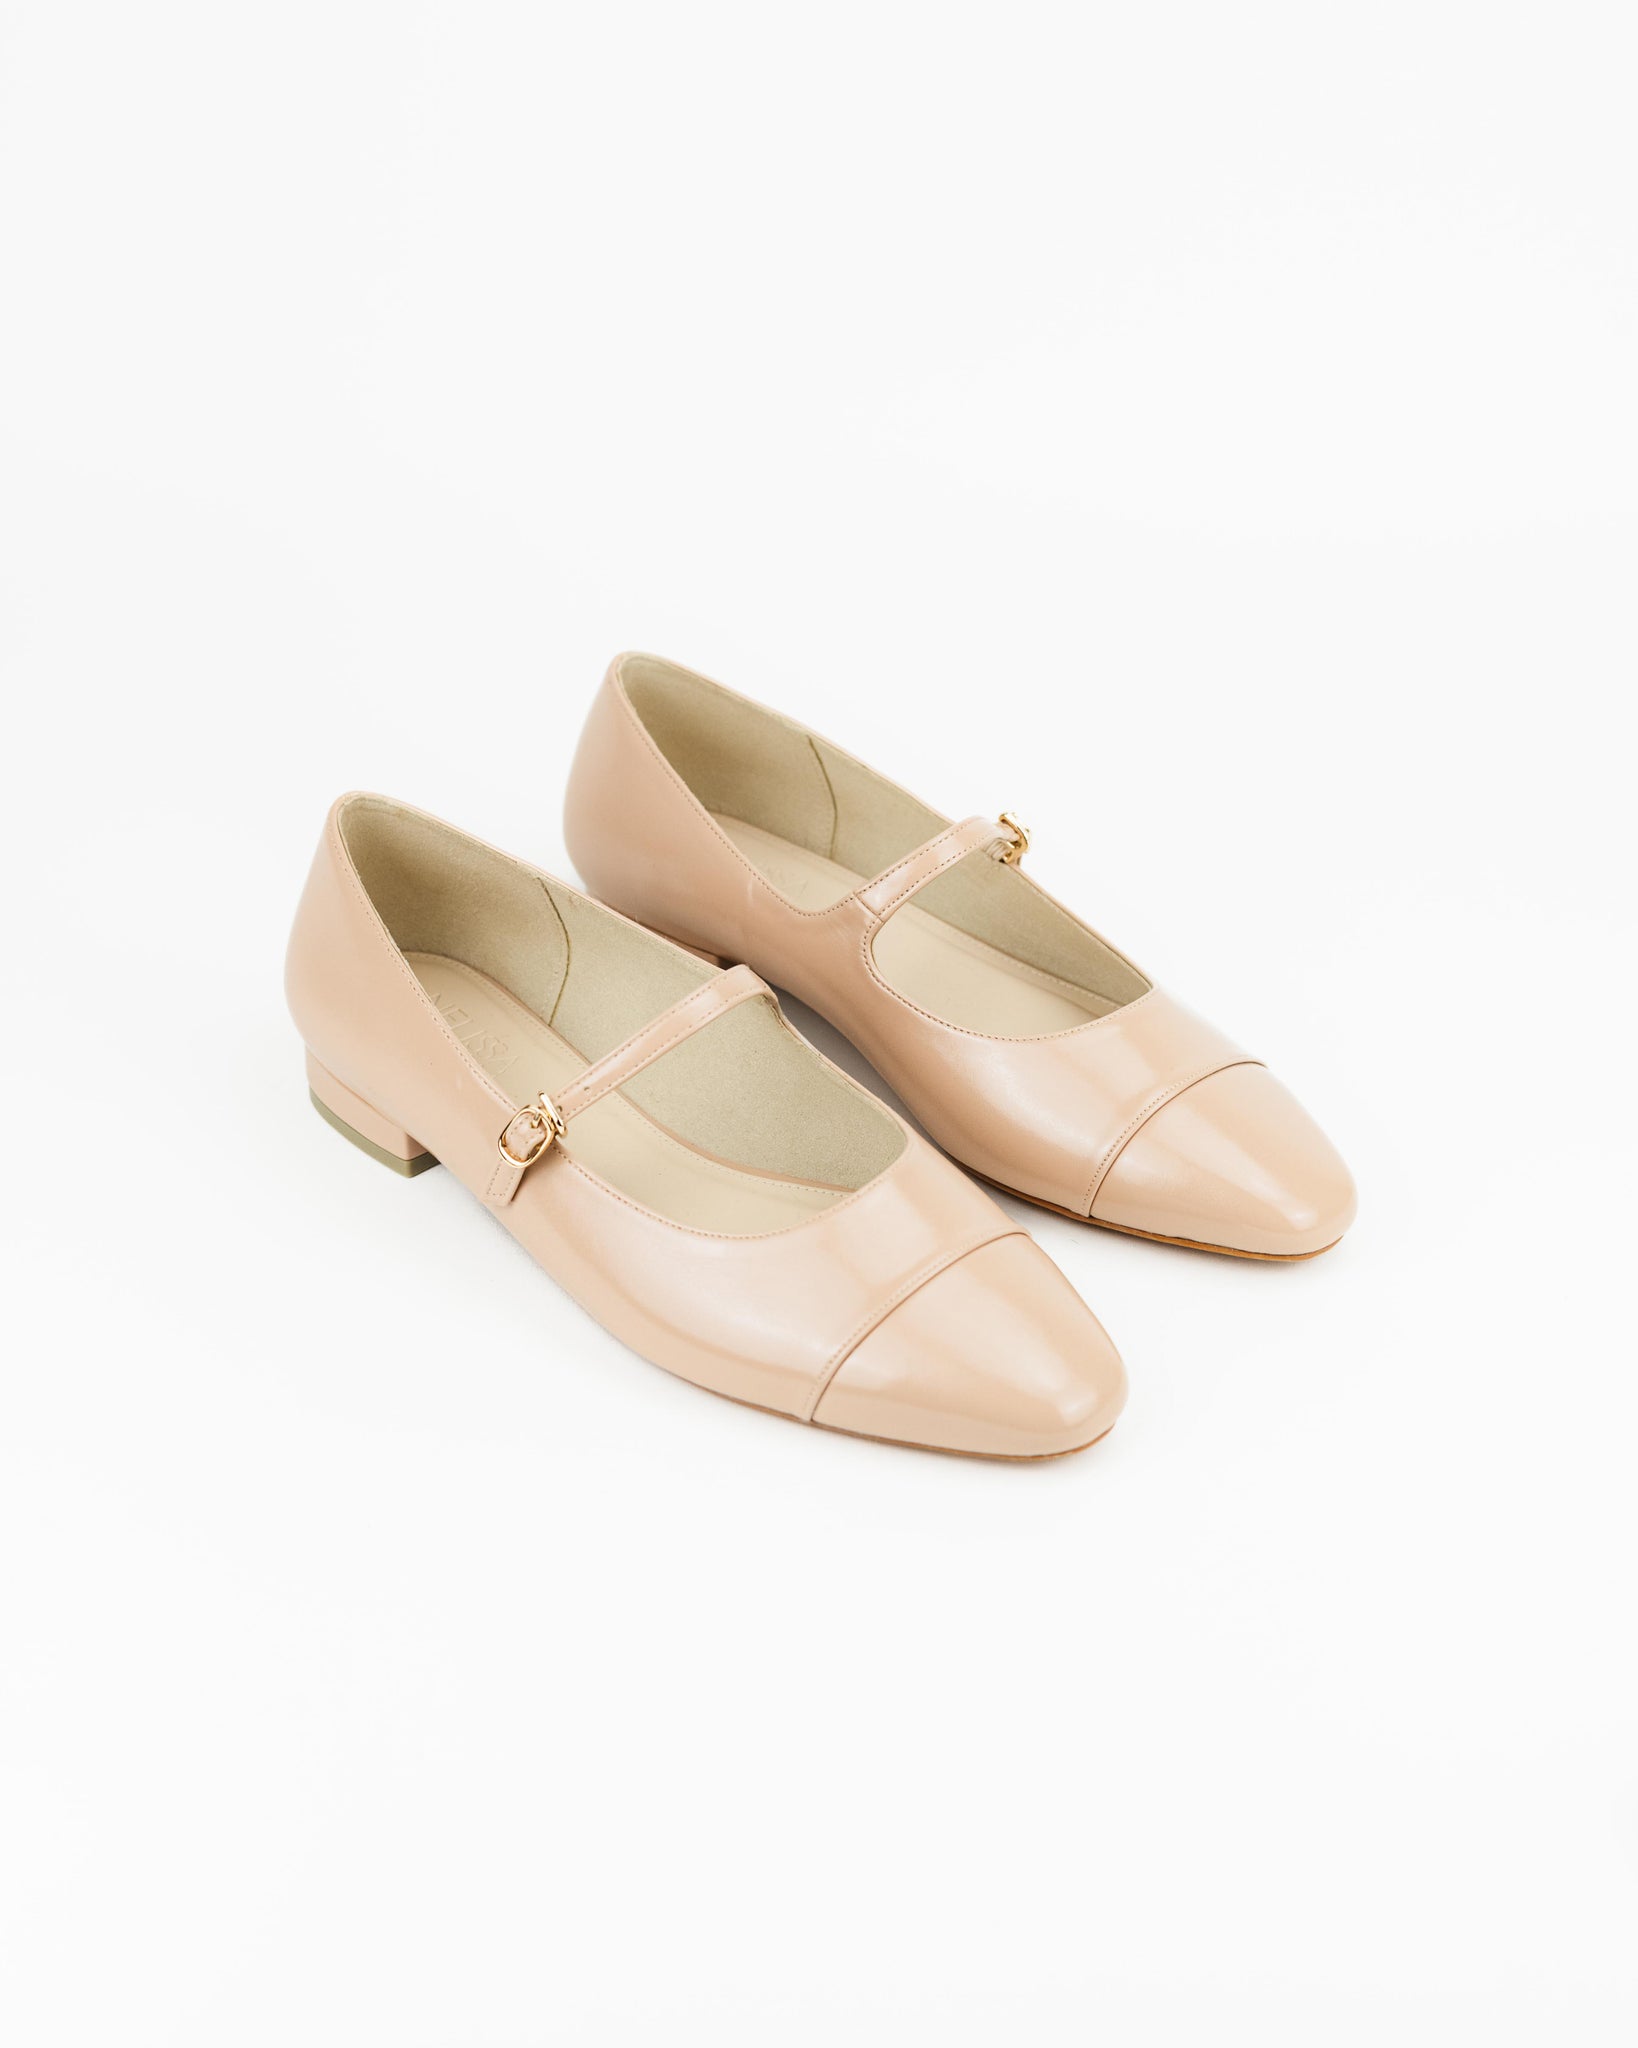 Sunny Mary Jane Loafers (Light Brown)